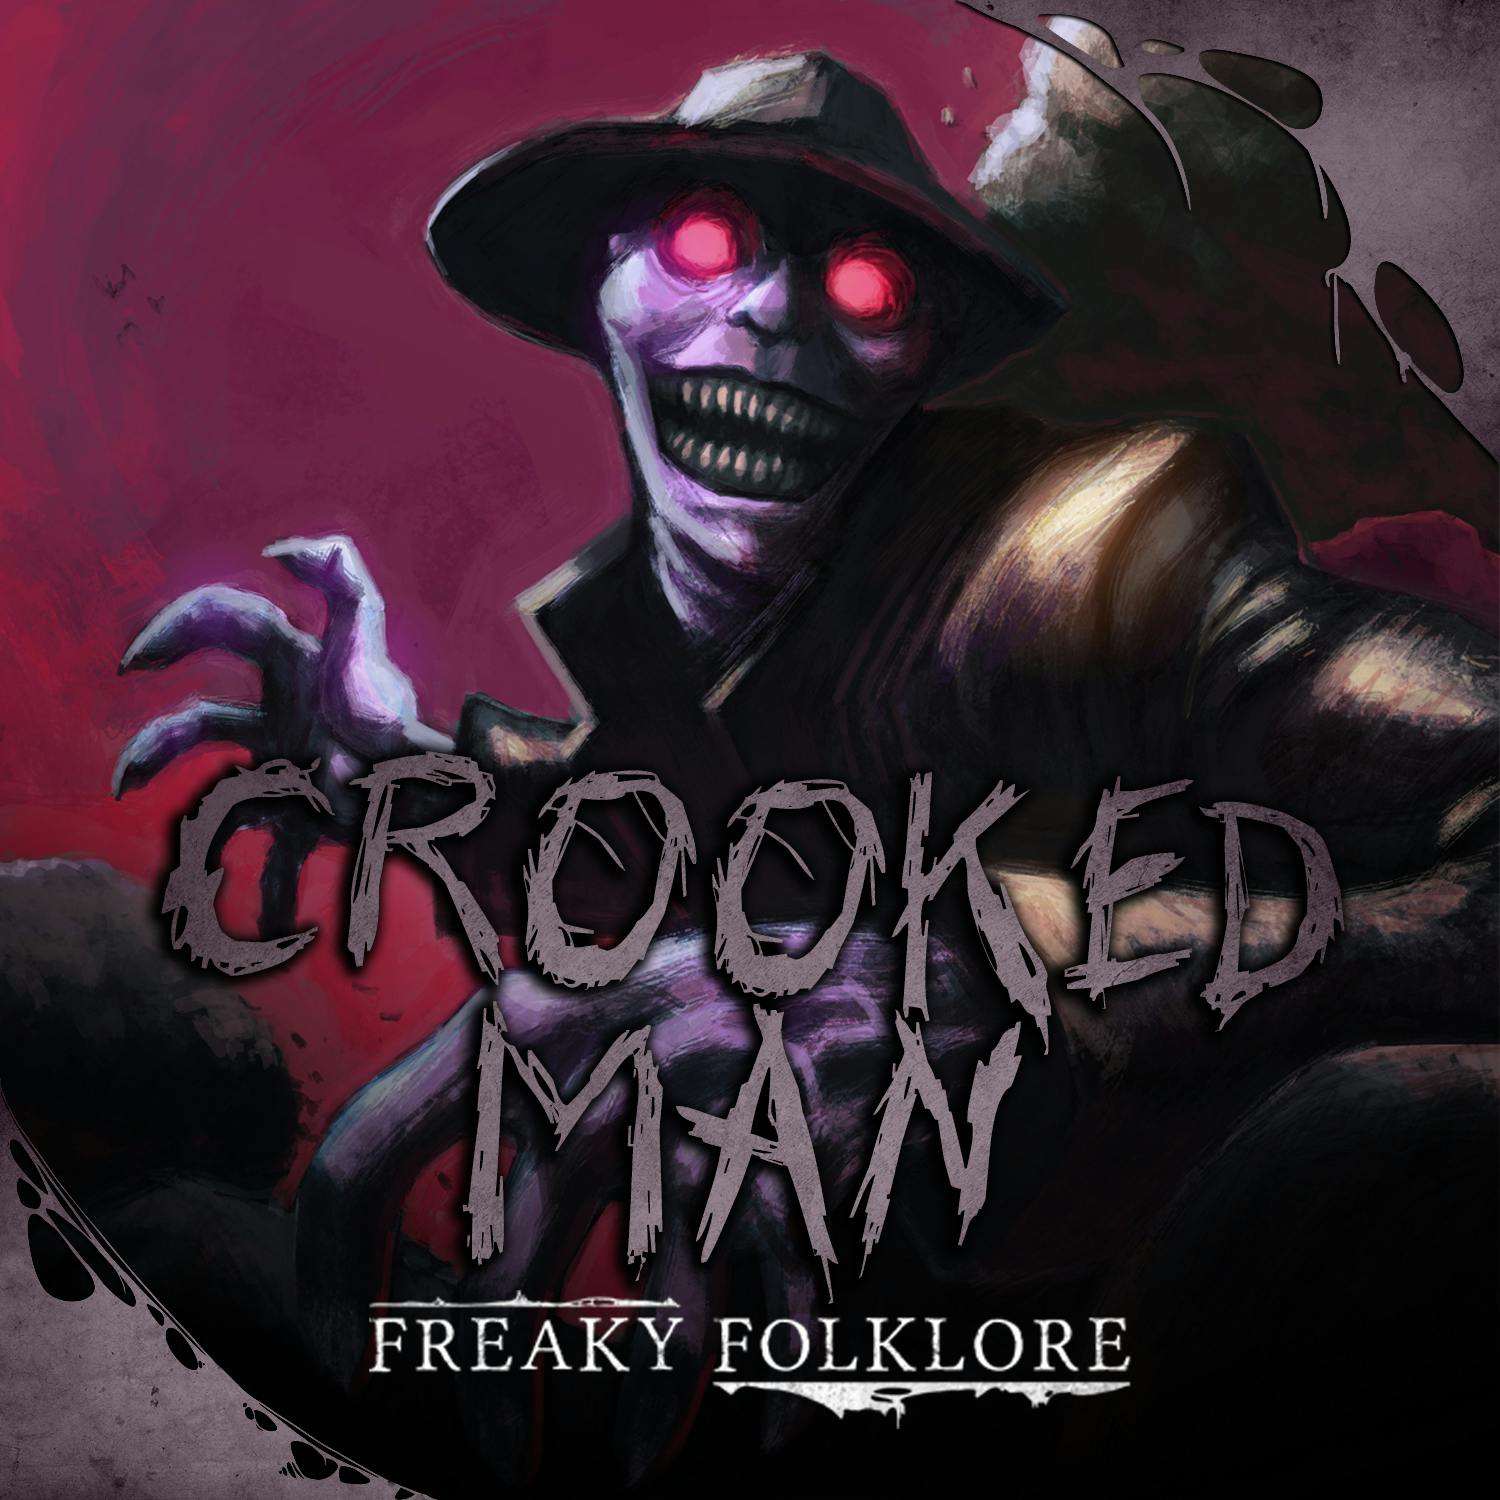 The Crooked Man  - More Than a Harmless Nursery Rhyme